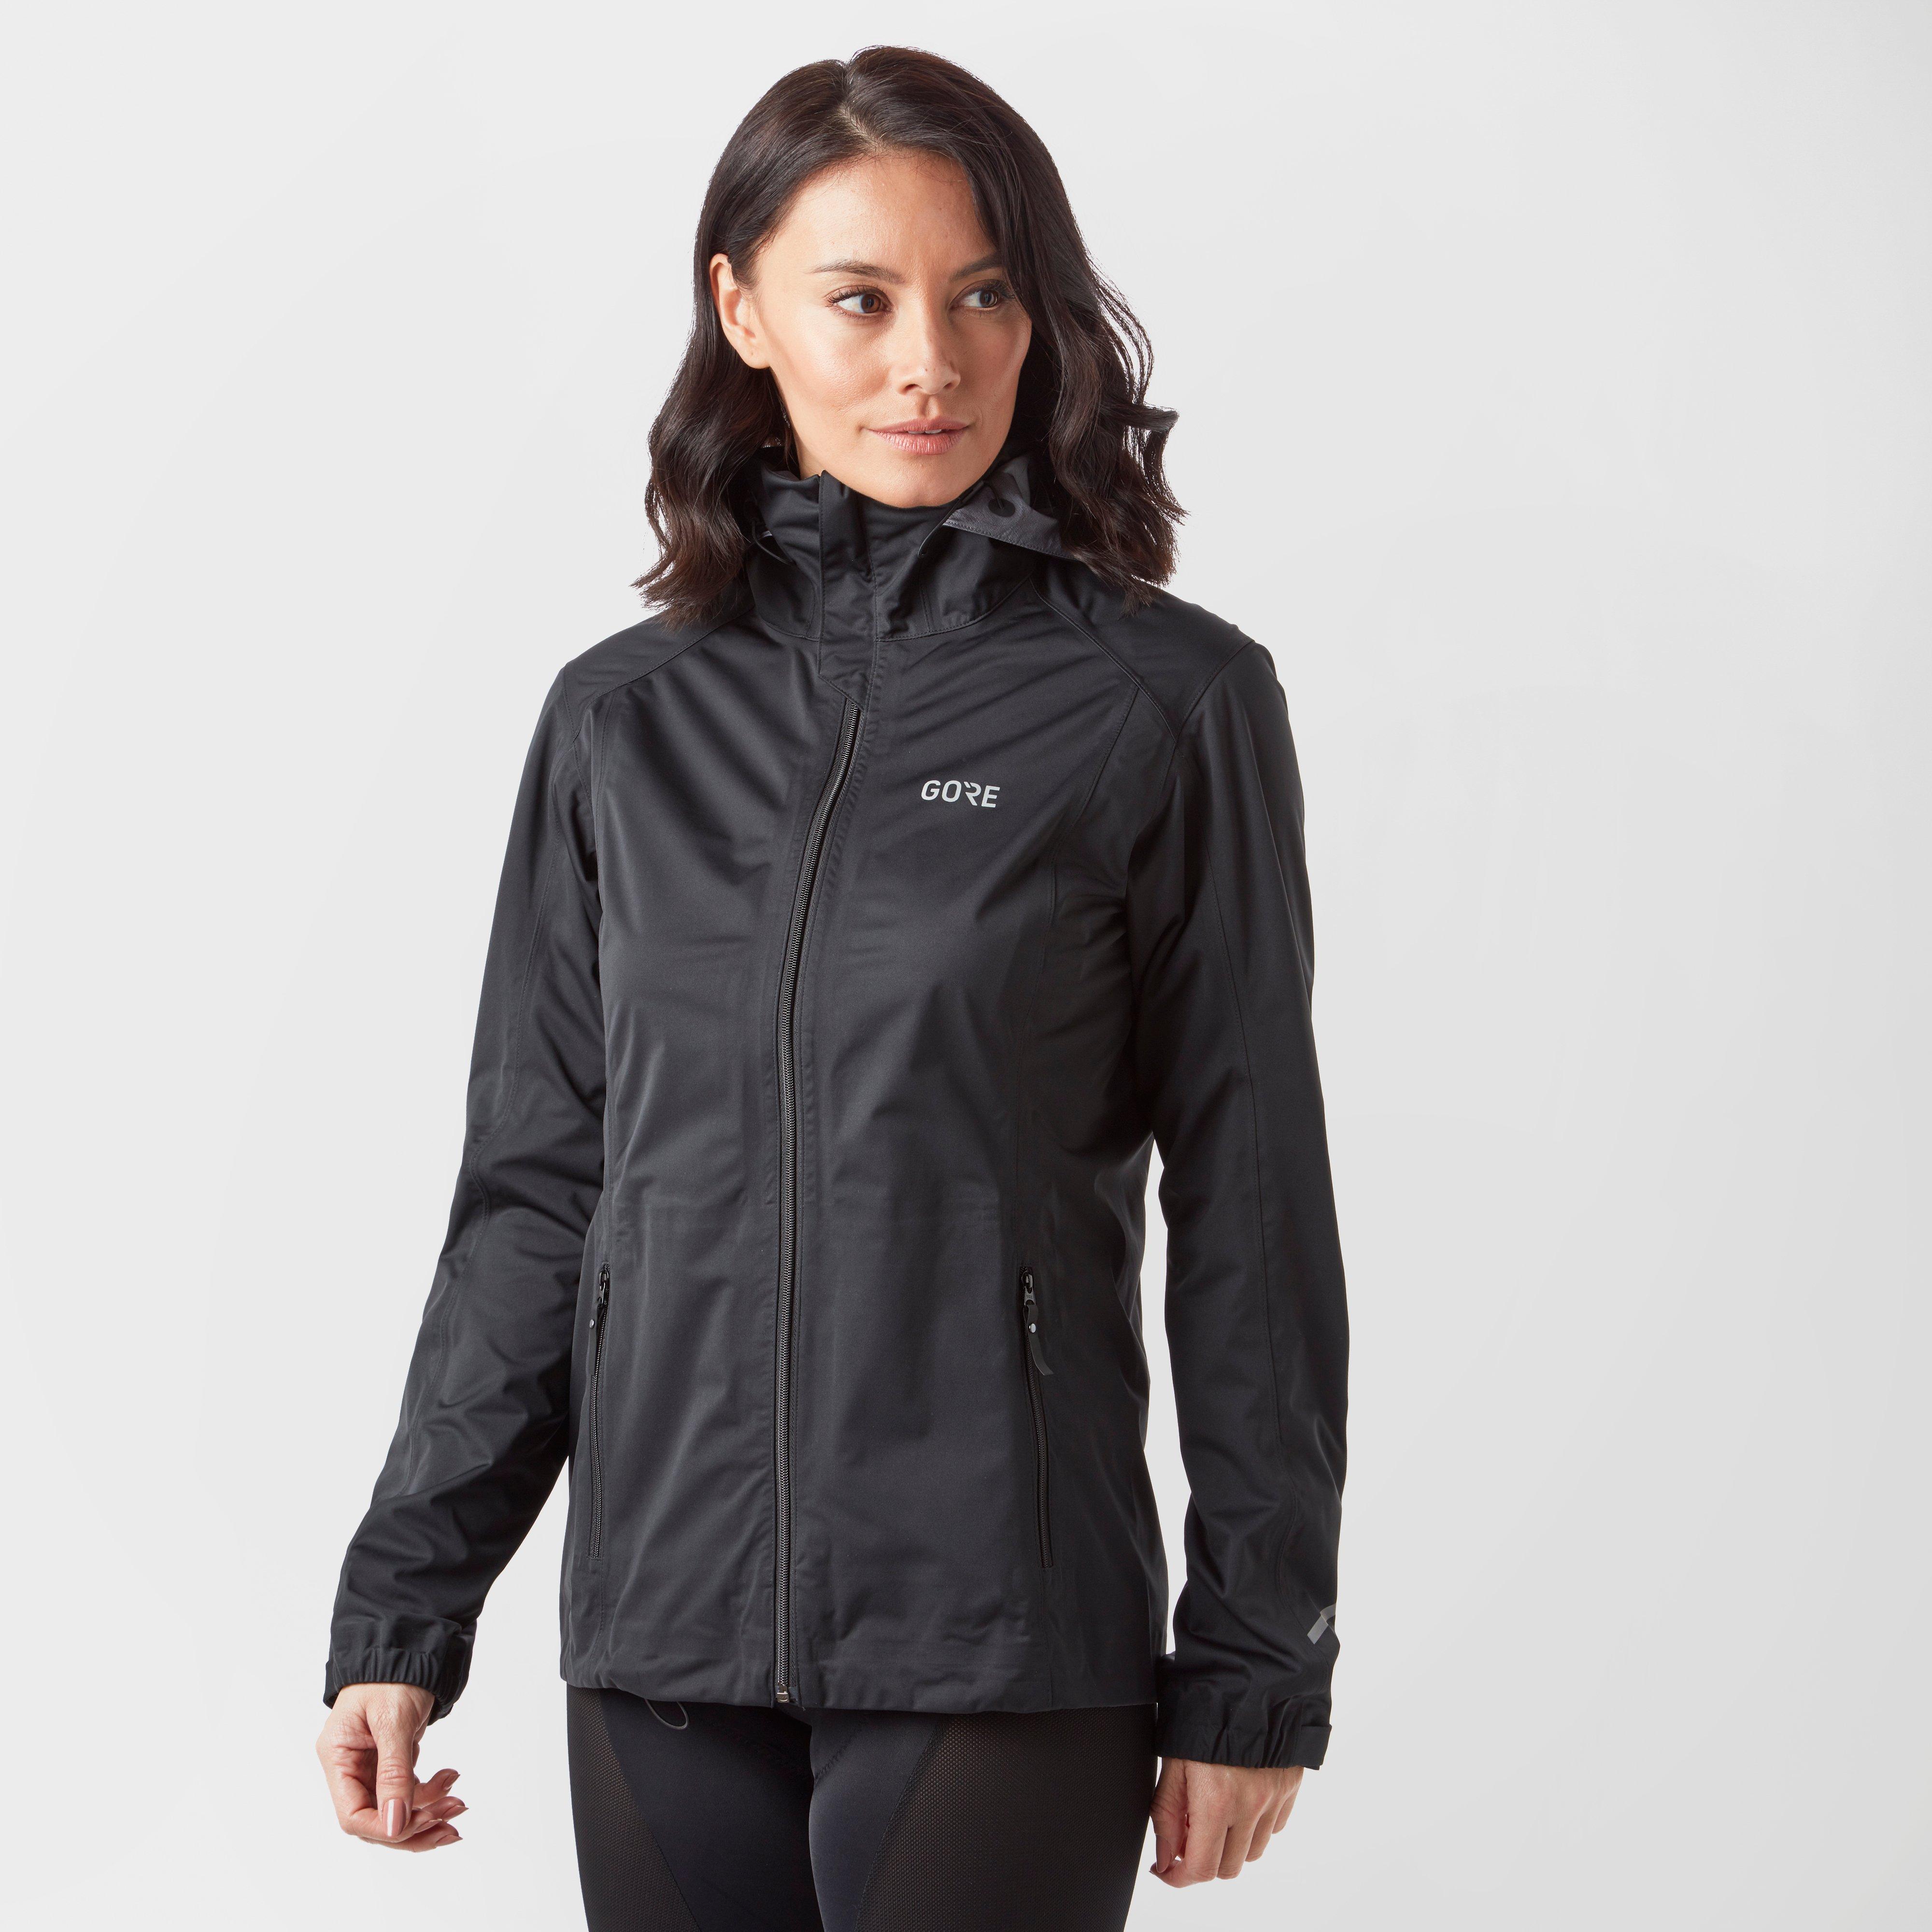 Gore R3 Gore-tex Active Hooded Running Jacket â Womenâs | Compare outdoor jacket prices at 